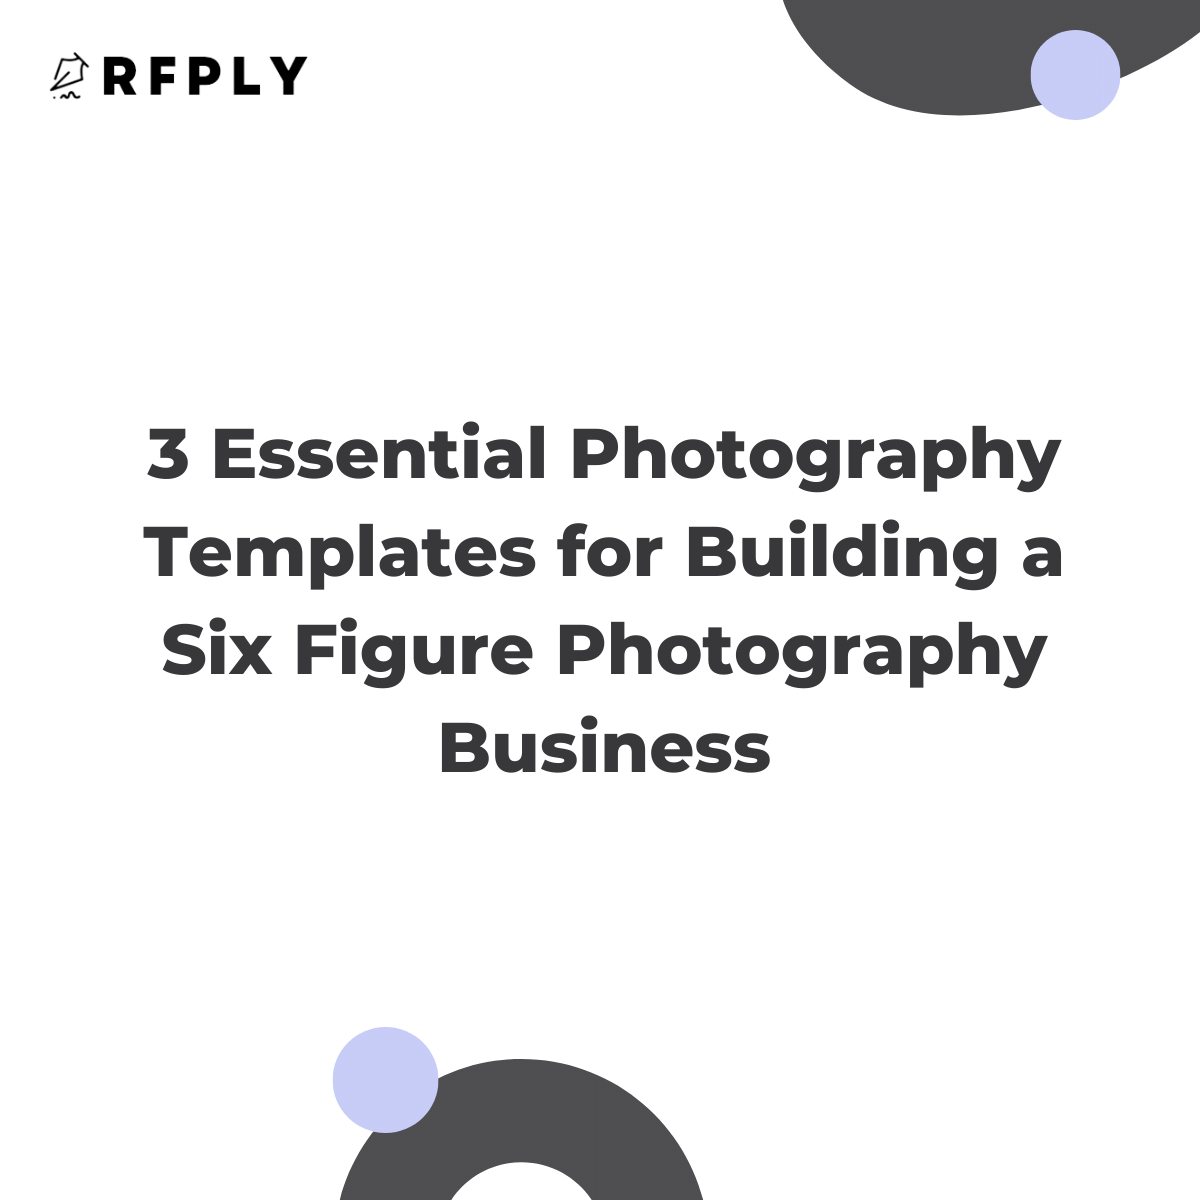 3 Essential Photography Templates for Building a Six Figure Photography Business